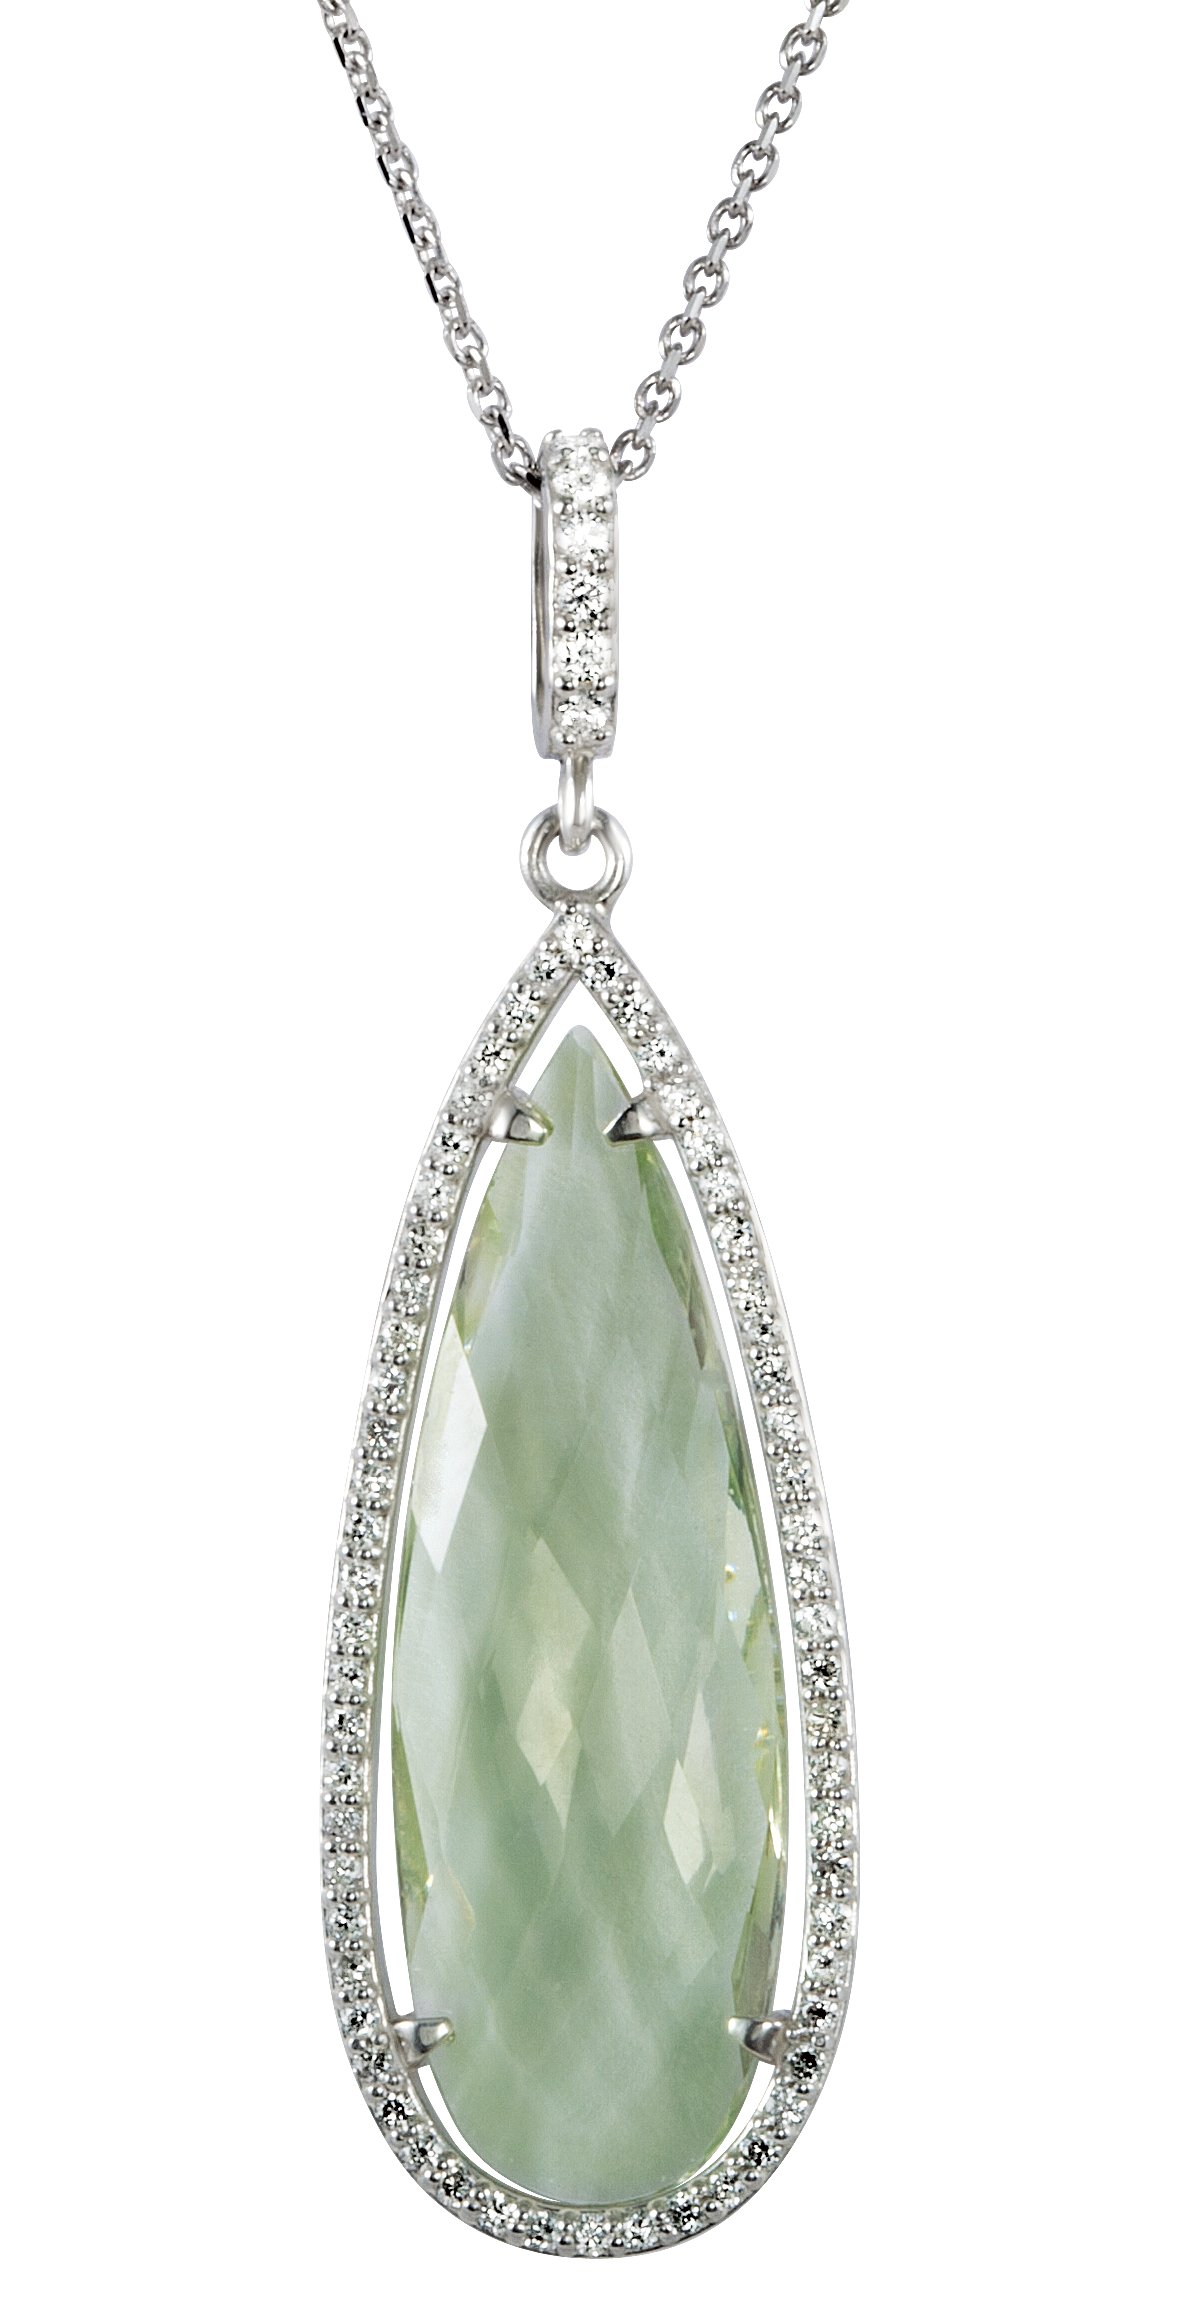 Halo-Styled Pear-Shaped Pendant or Necklace